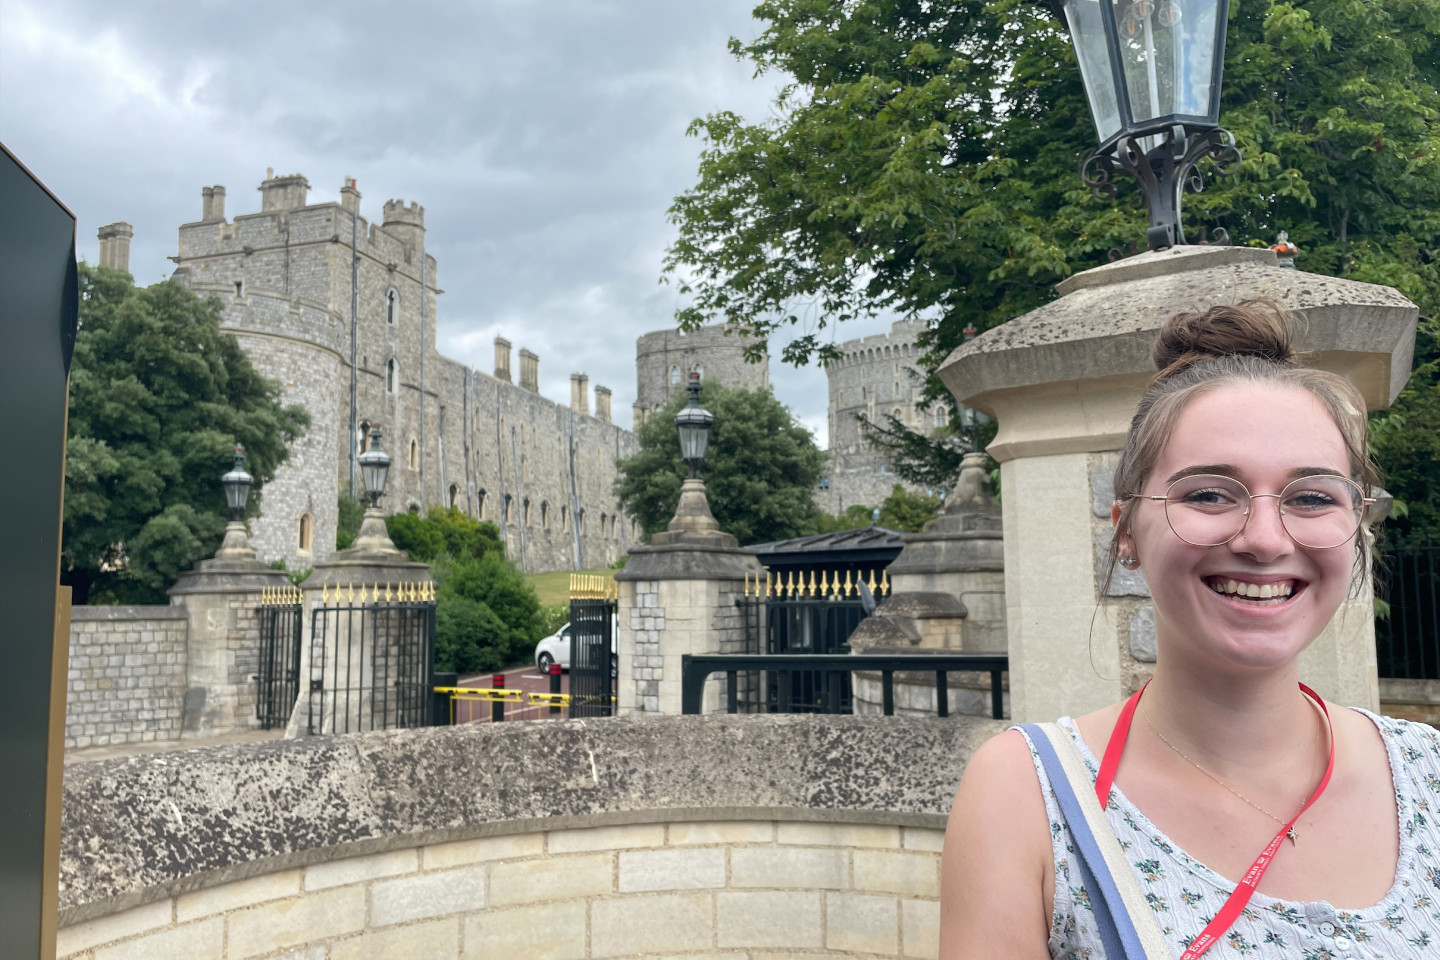 Abbie Lindblade stands in front of a gate at Windsor Castle.